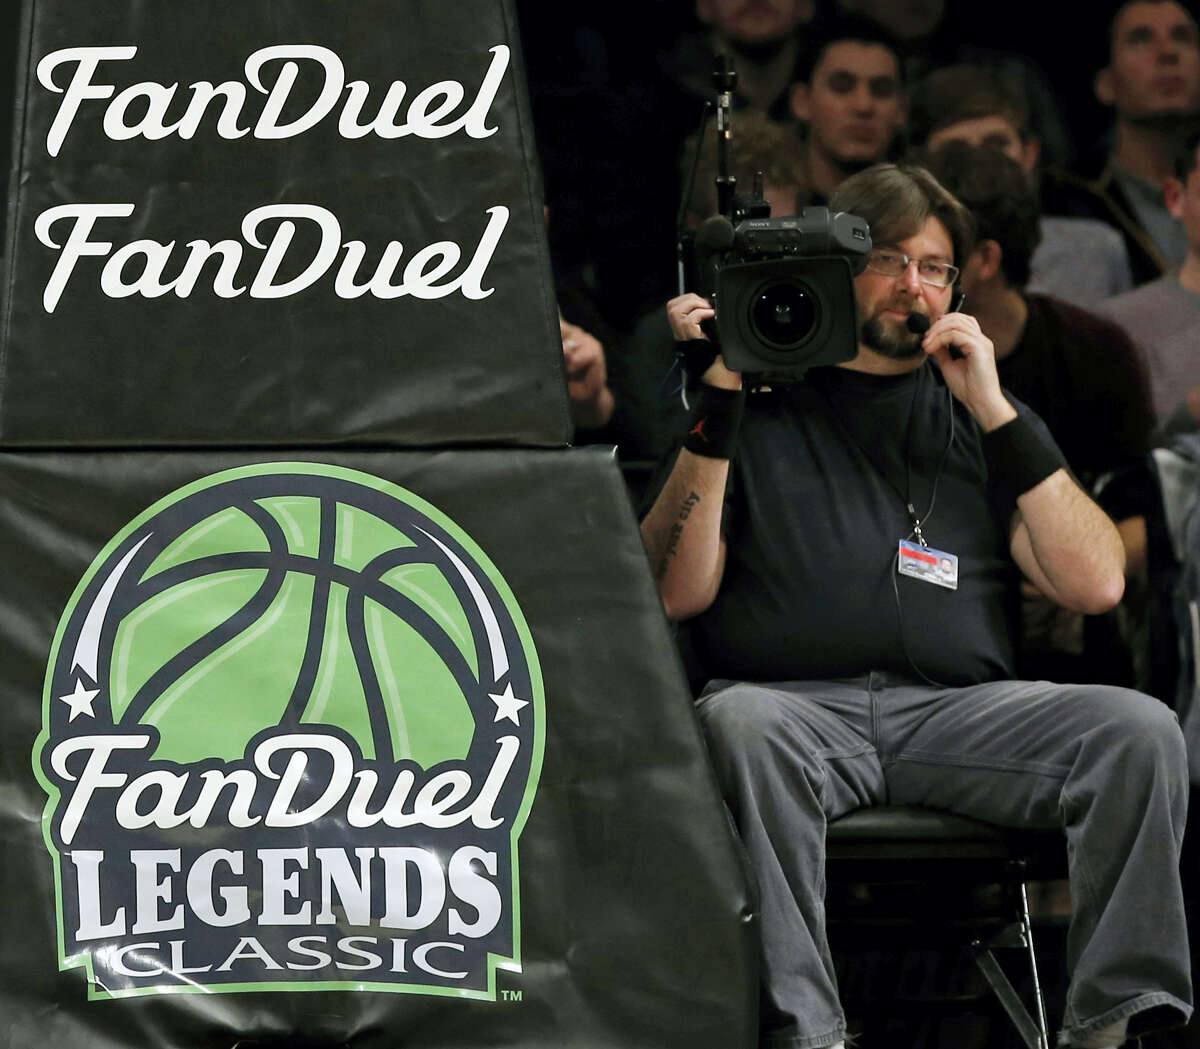 In this Nov. 24, 2015 photo, FanDuel advertising covers the post at an NCAA college basketball matchup in the FanDuel Legends Classic consolation game, at the Barclays Center in New York.